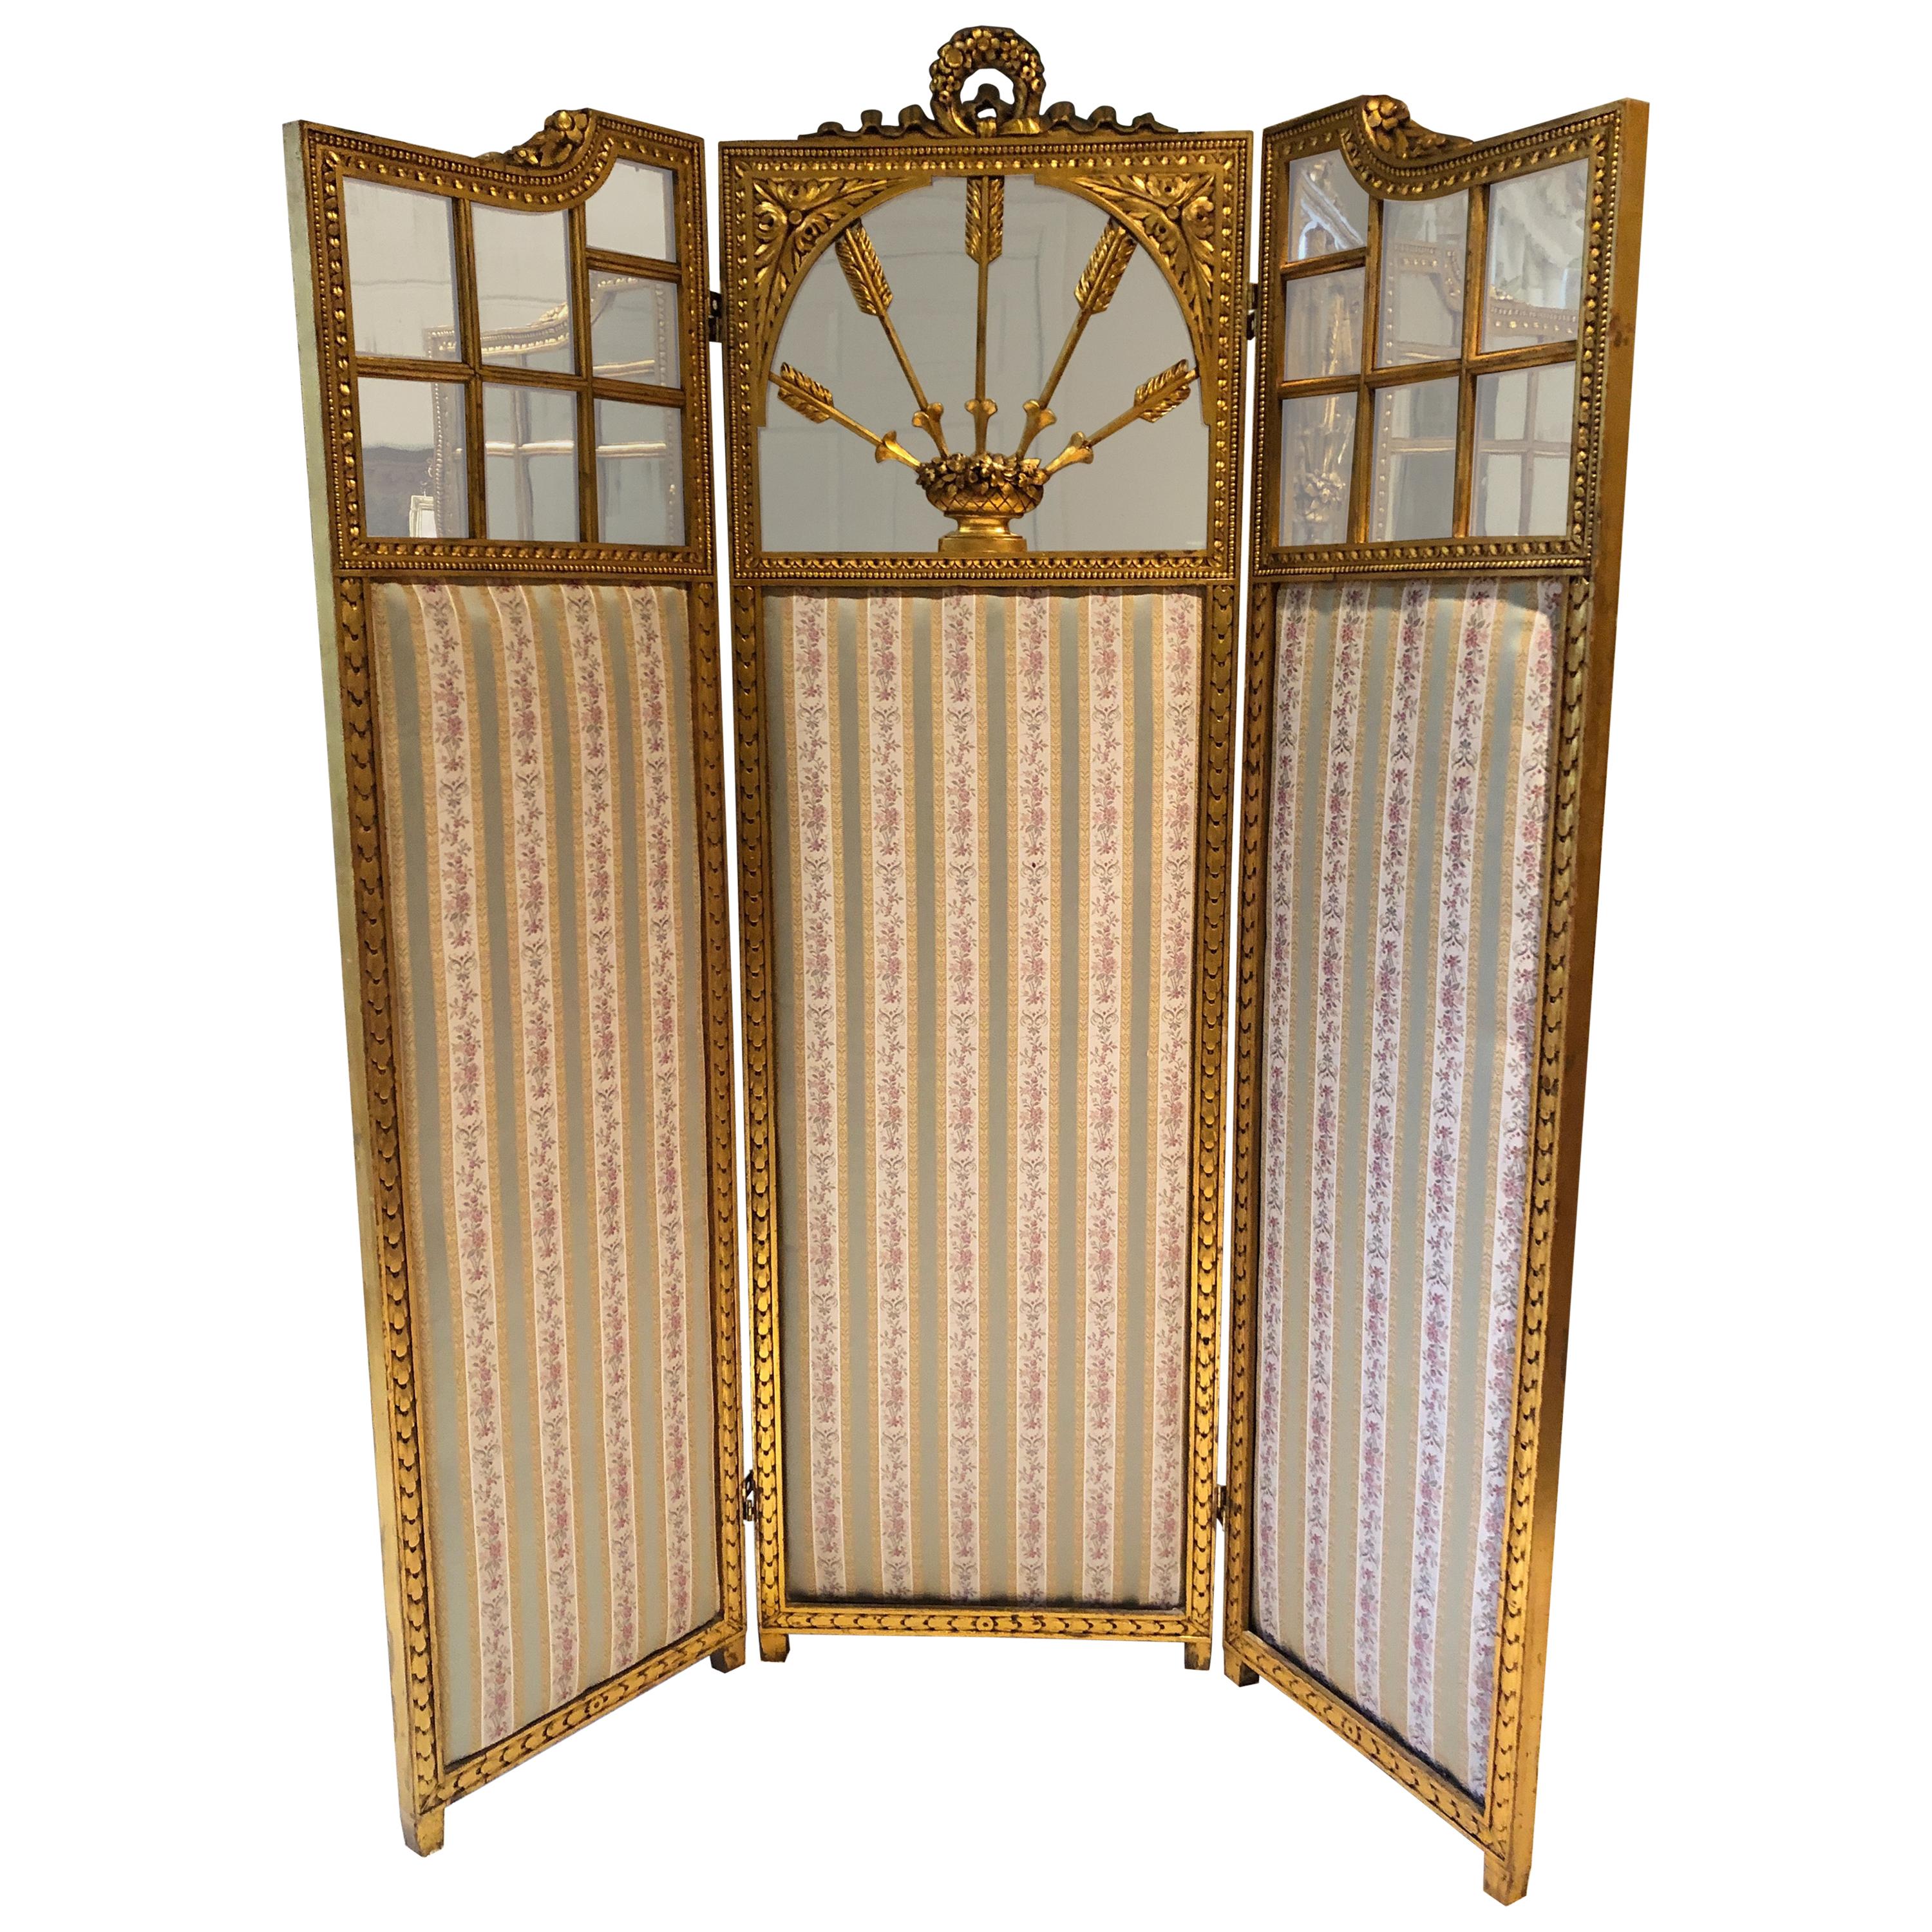 French Neoclassical Revival Giltwood Mirror and Upholstered 3-Panel Screen